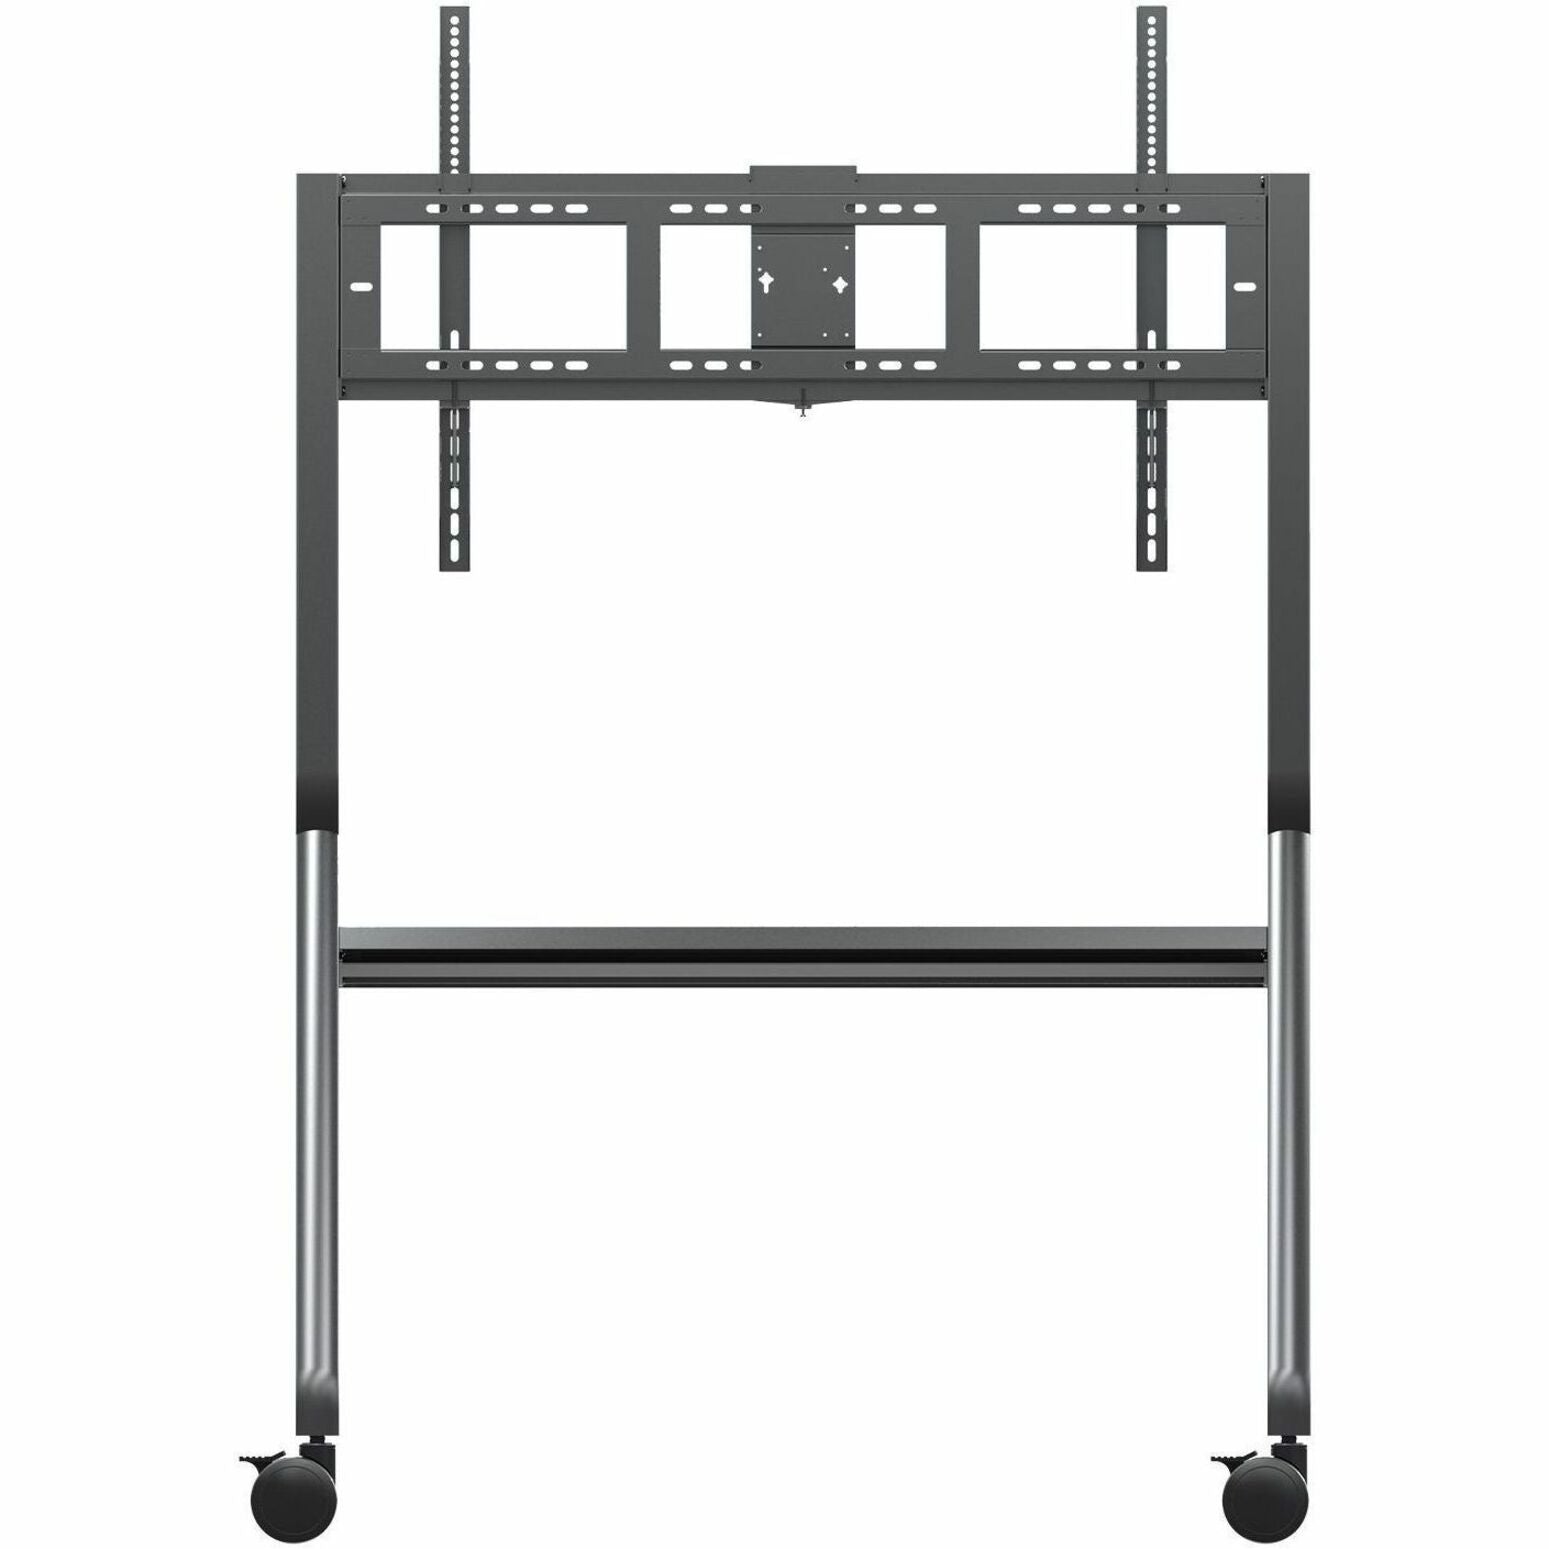 ViewSonic VB-STND-009 Display Cart, Storage Tray, Compact, Maneuverable, 360° Swivel, Mobility, Robust, Adjustable Height, Locking Casters